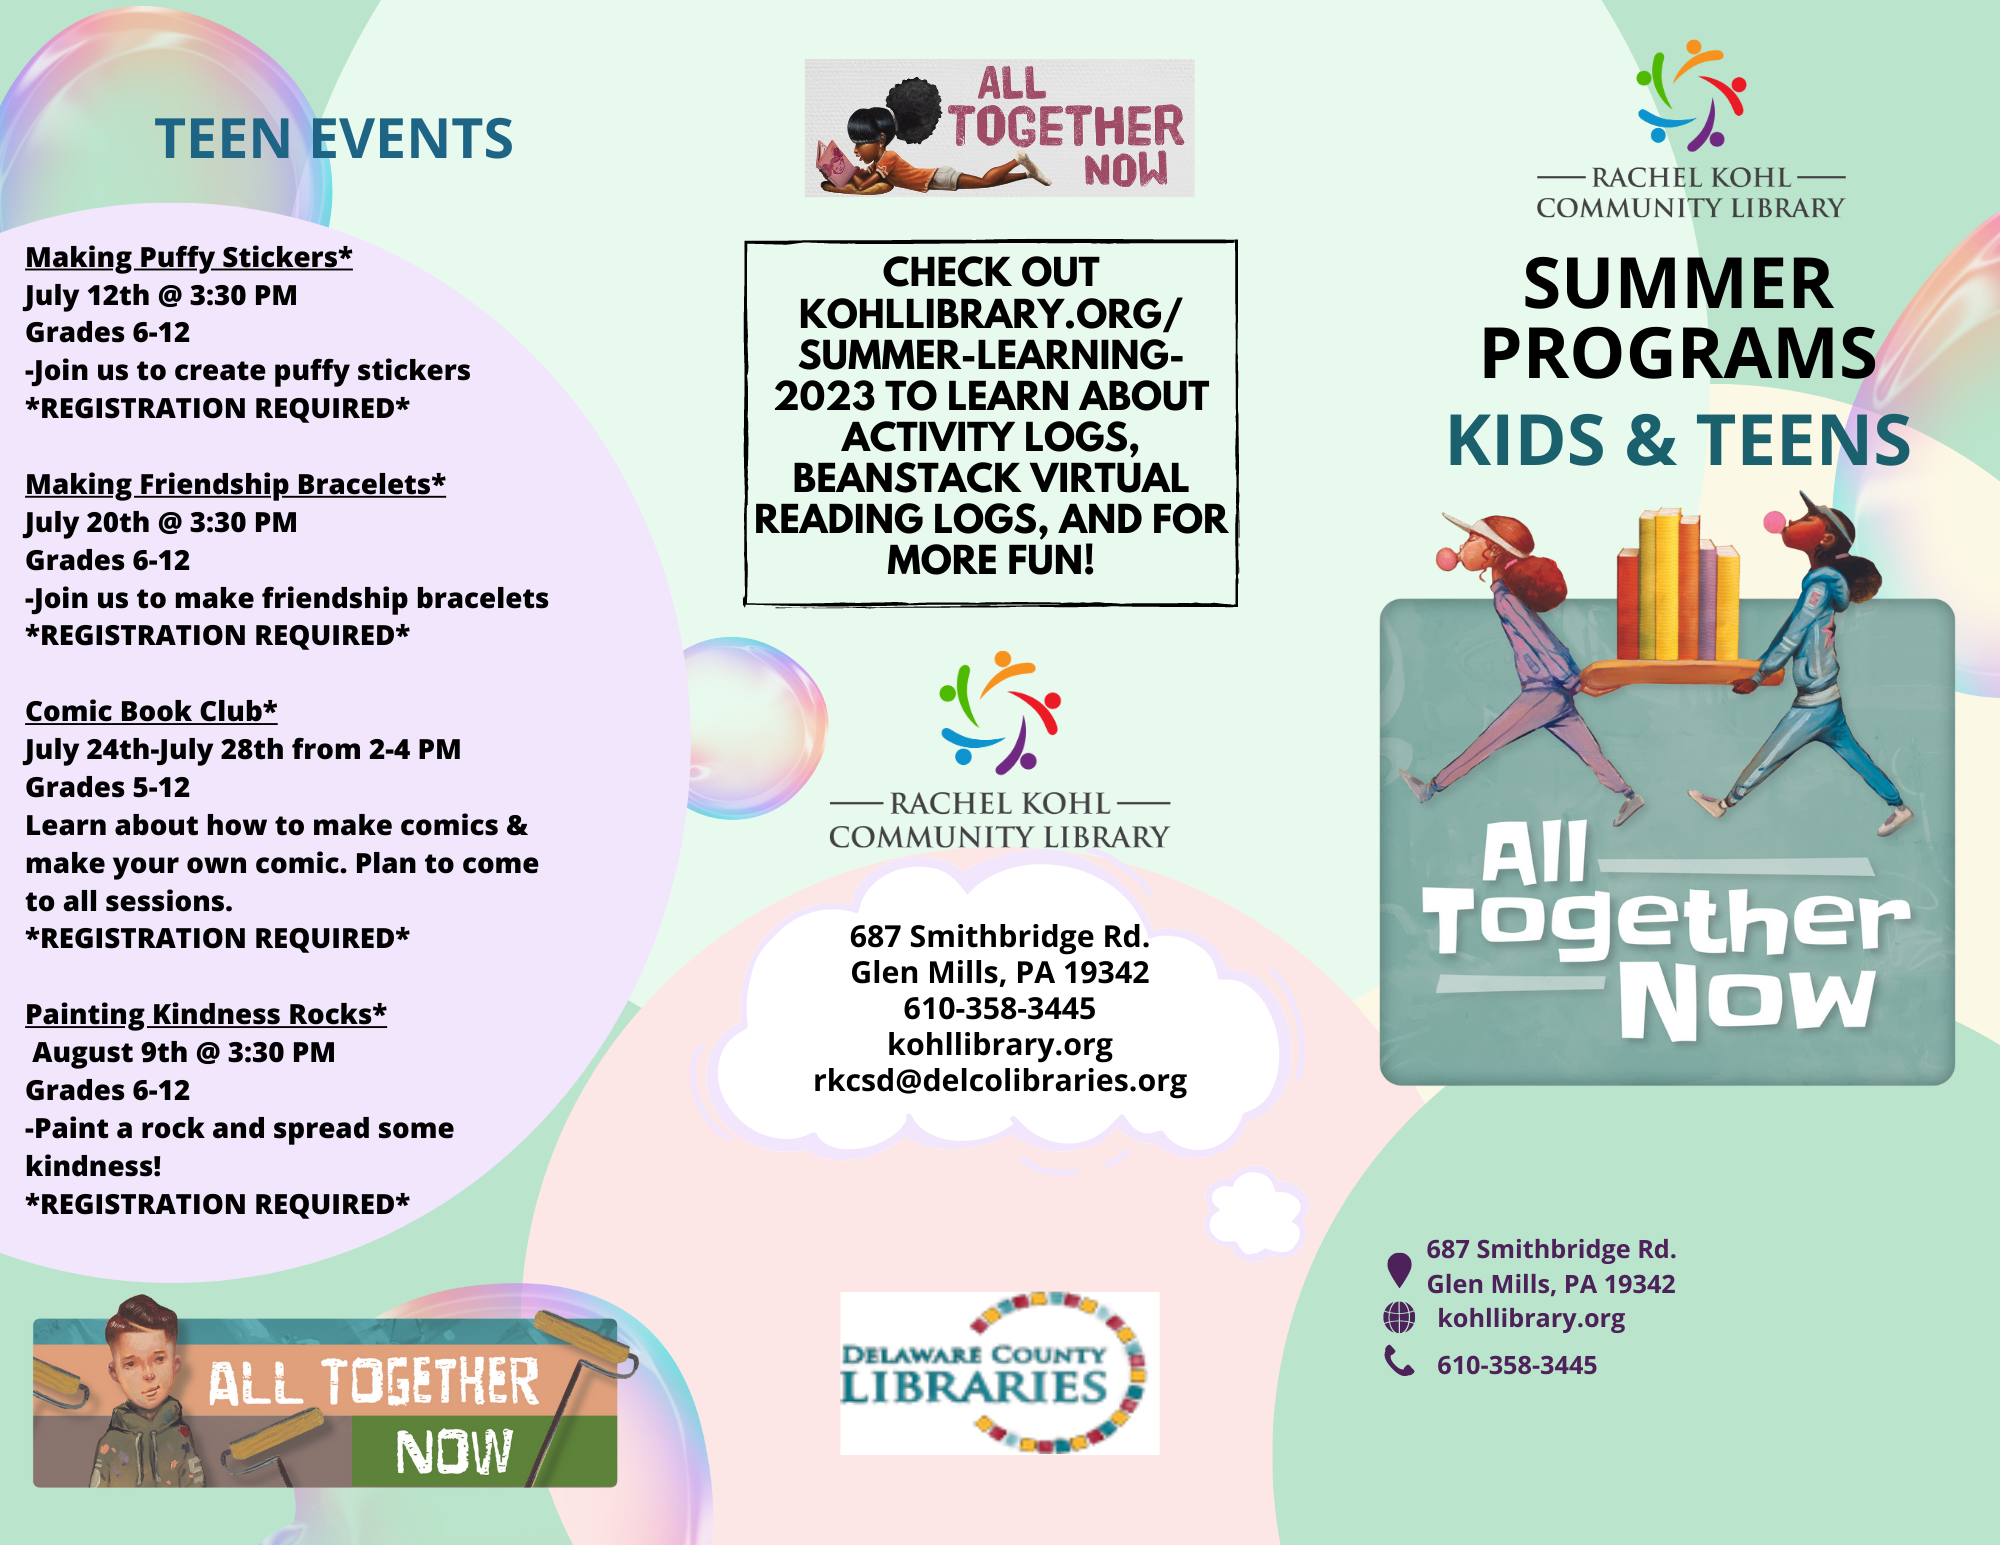 A brochure with a list of the Summer Programs for kids & teens at the library